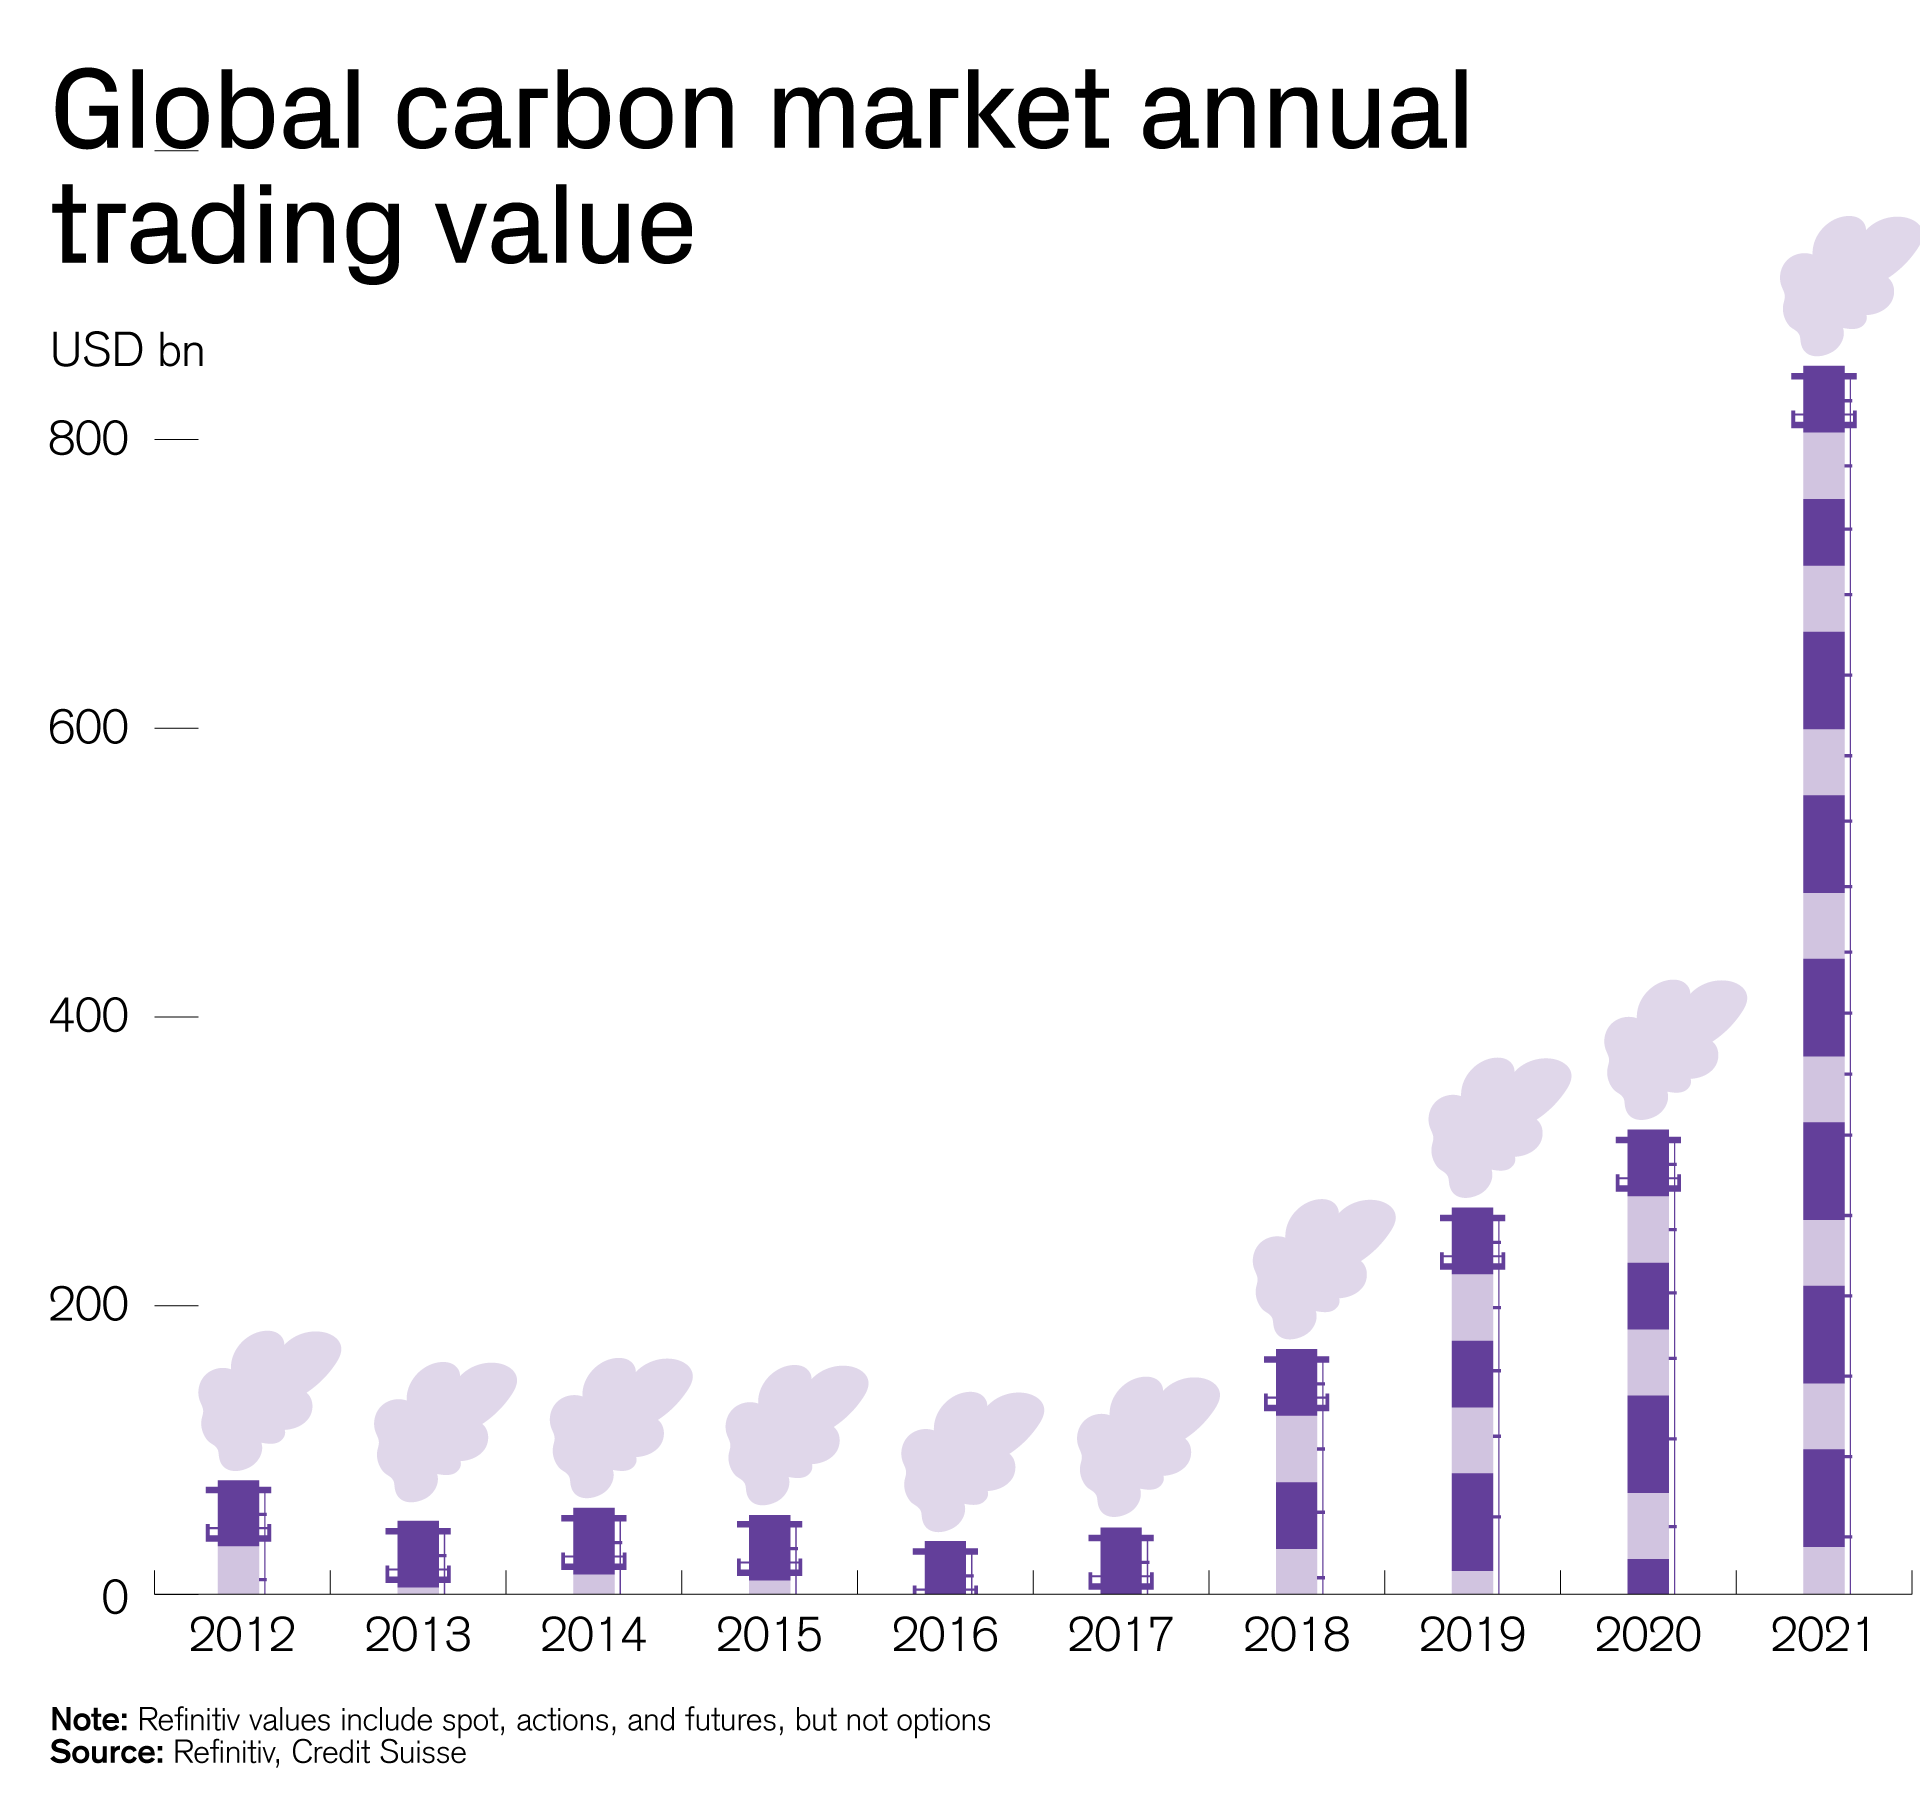 Global carbon market annual trading value